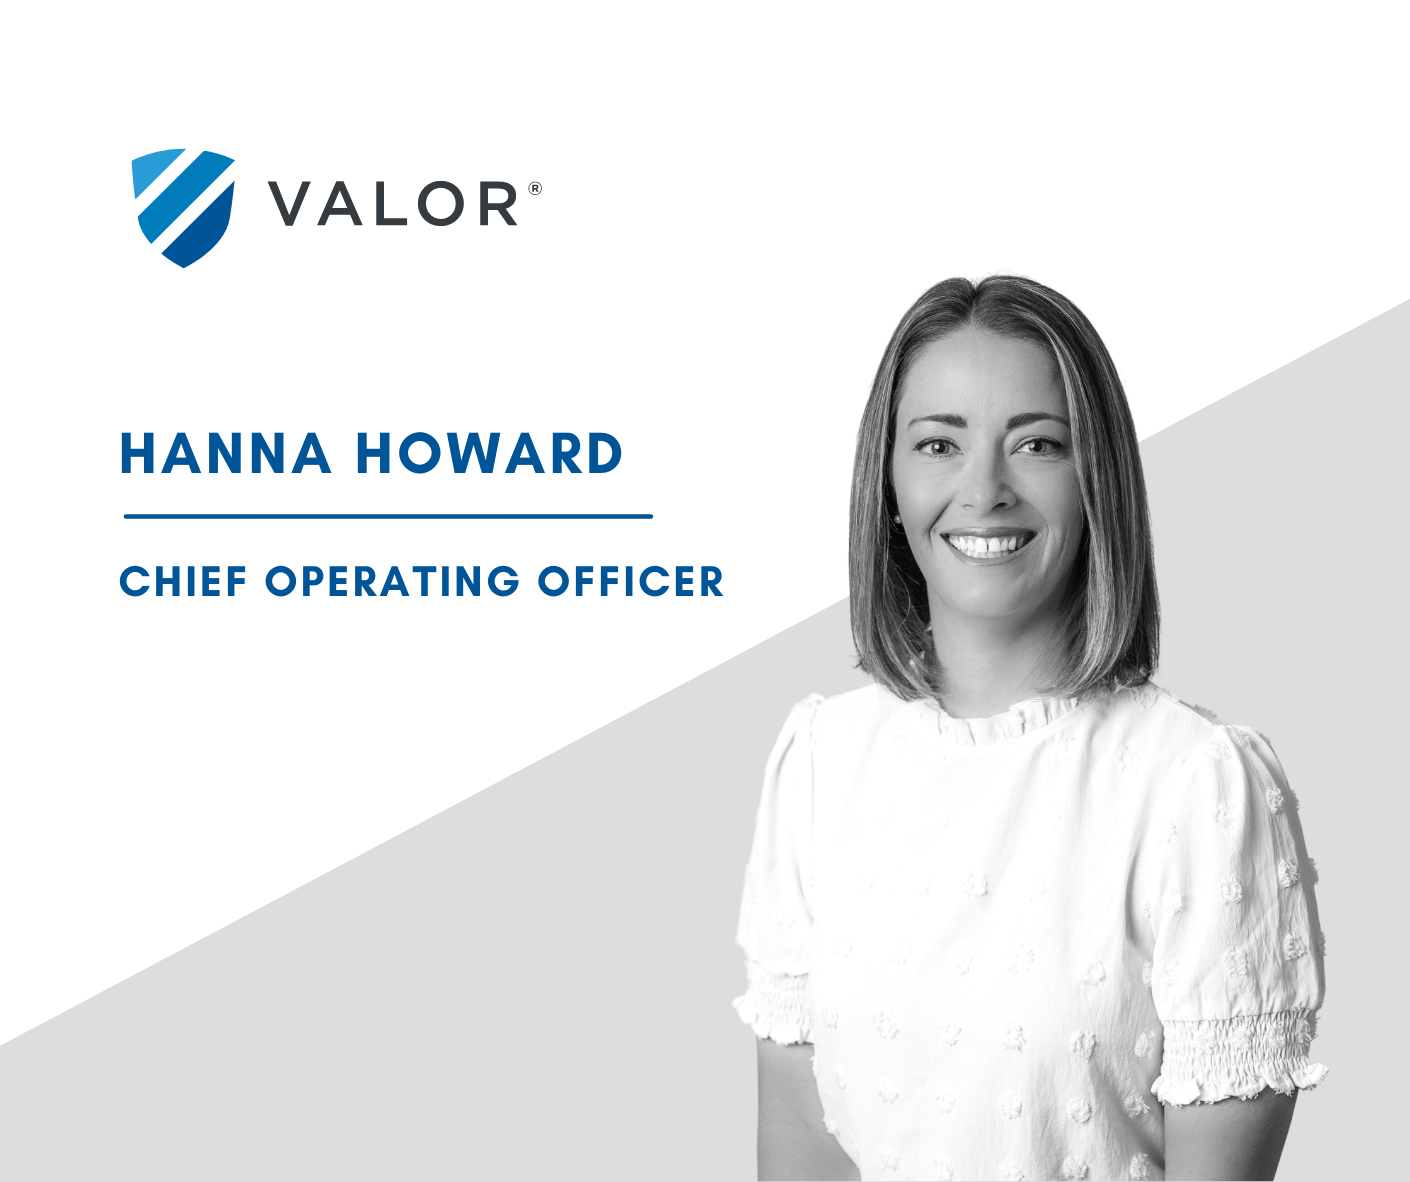 Hanna Howard is the Chief Operating Officer at Valor, she also serves in the role of Integrator and ensure excellence at Valor.